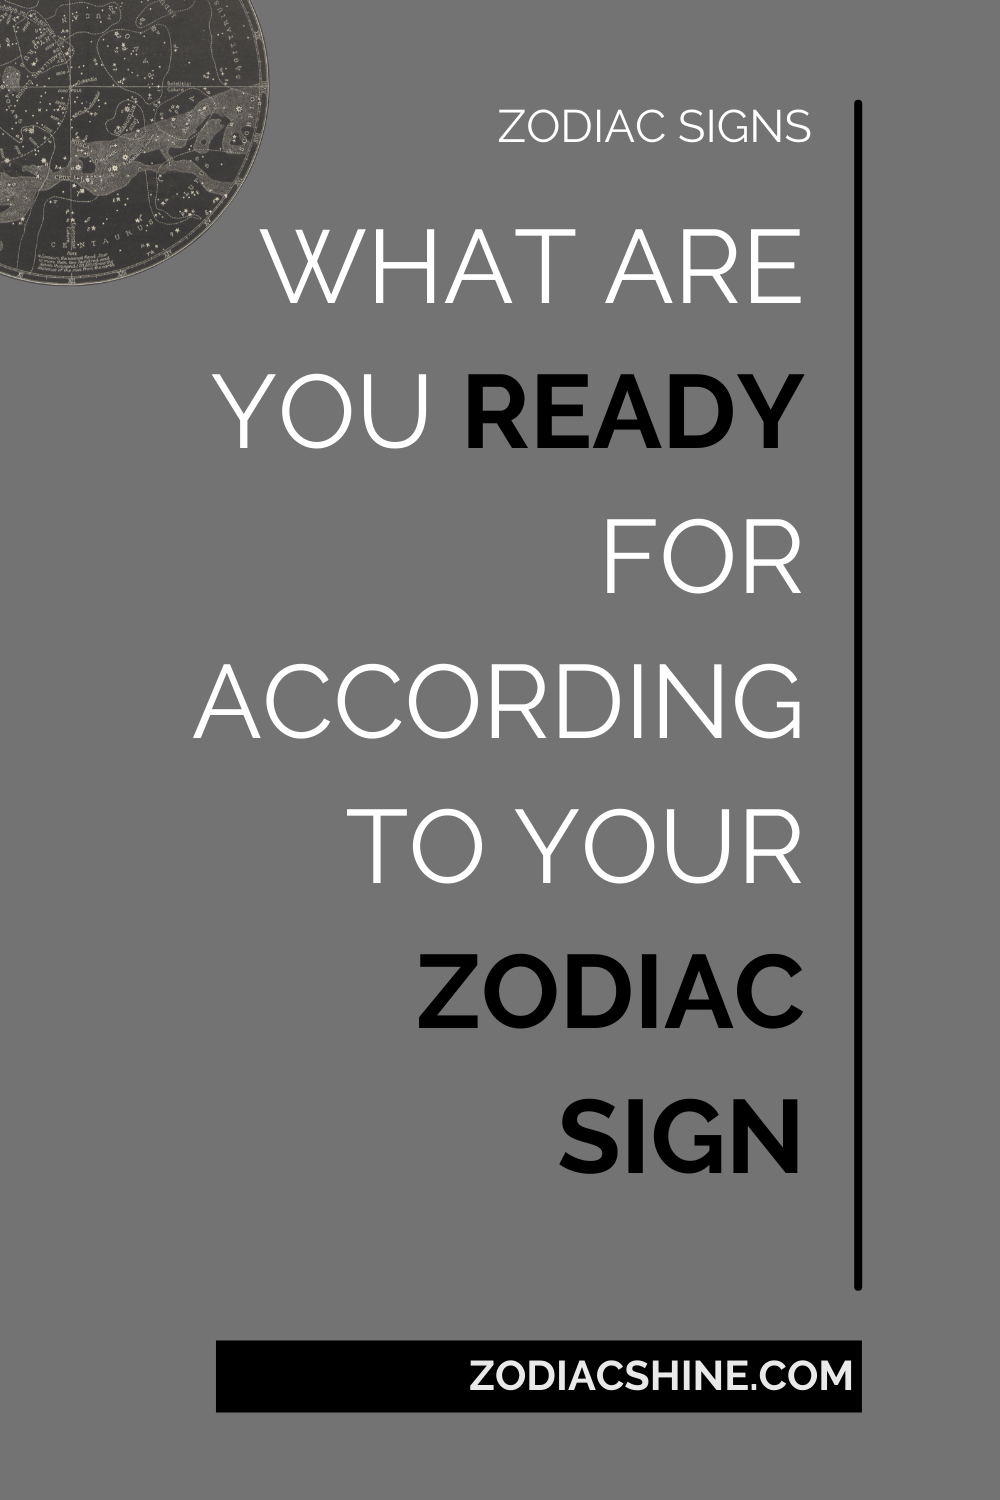 WHAT ARE YOU READY FOR ACCORDING TO YOUR ZODIAC SIGN